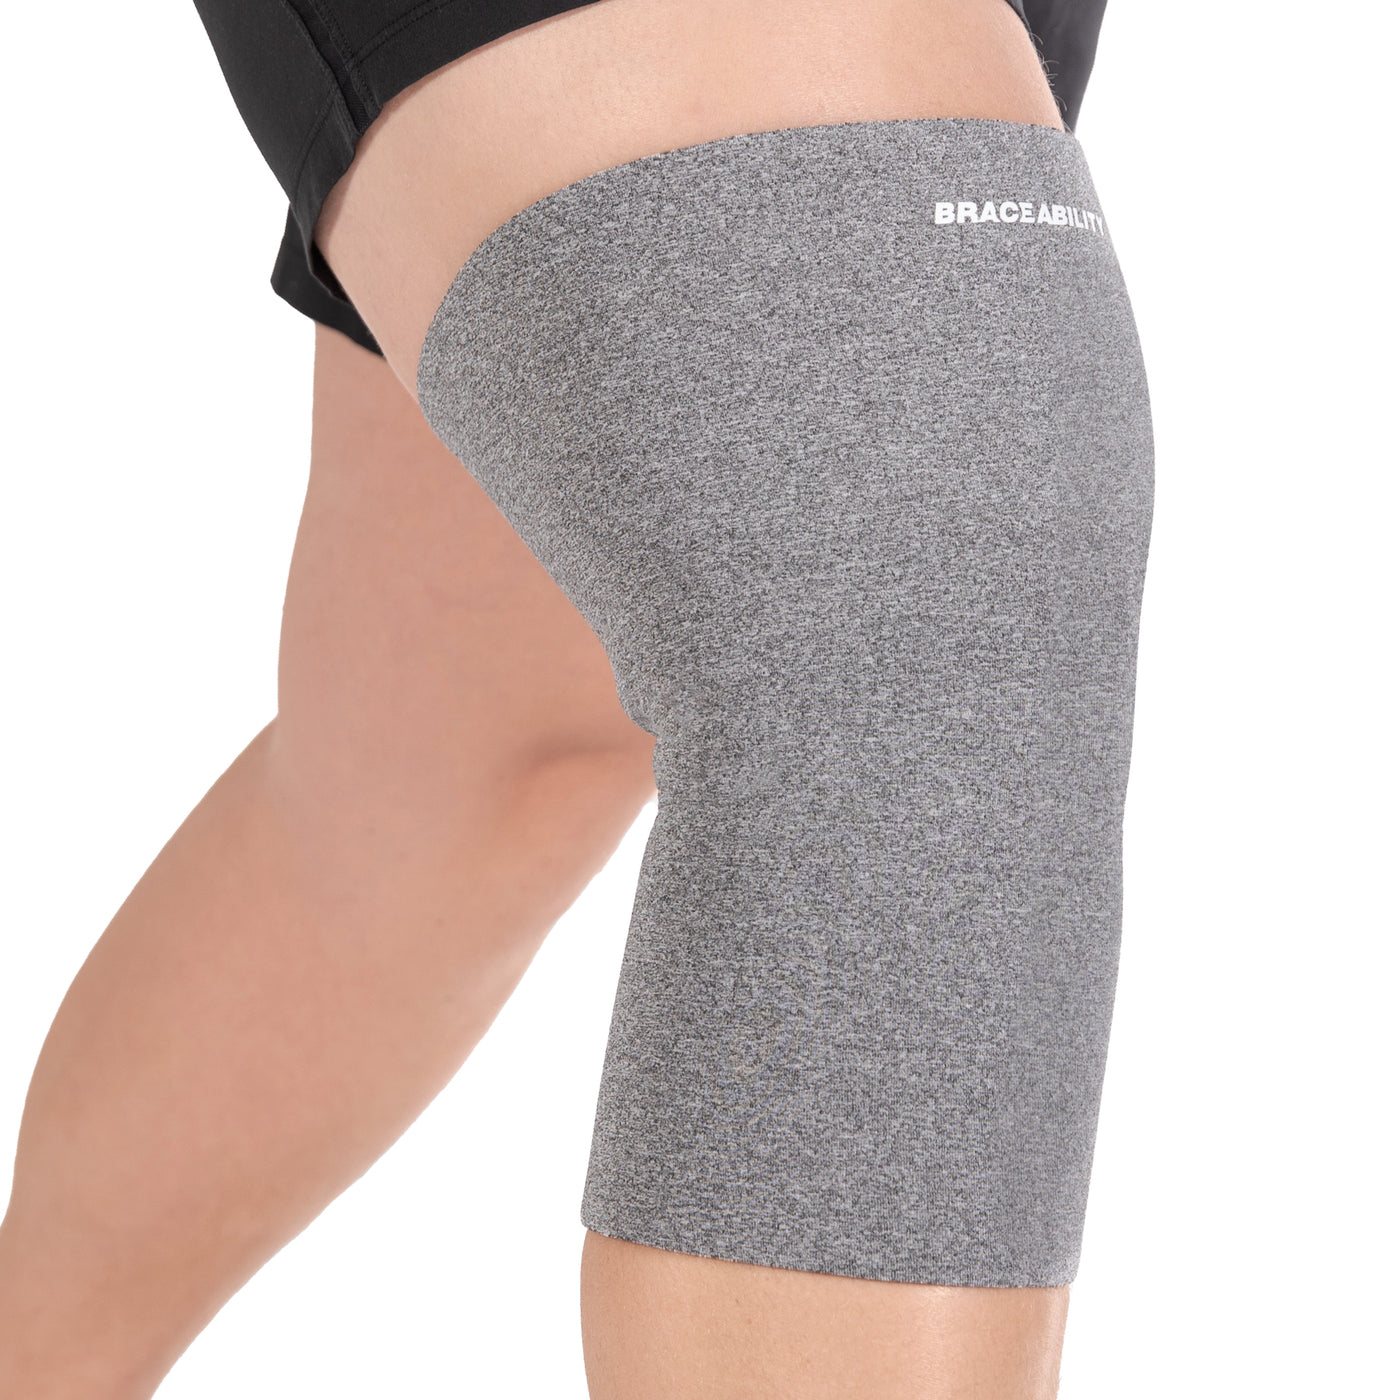 Knee Support Brace Compression Sleeves for Men and Women (Black) (Pair)  [3XL] 